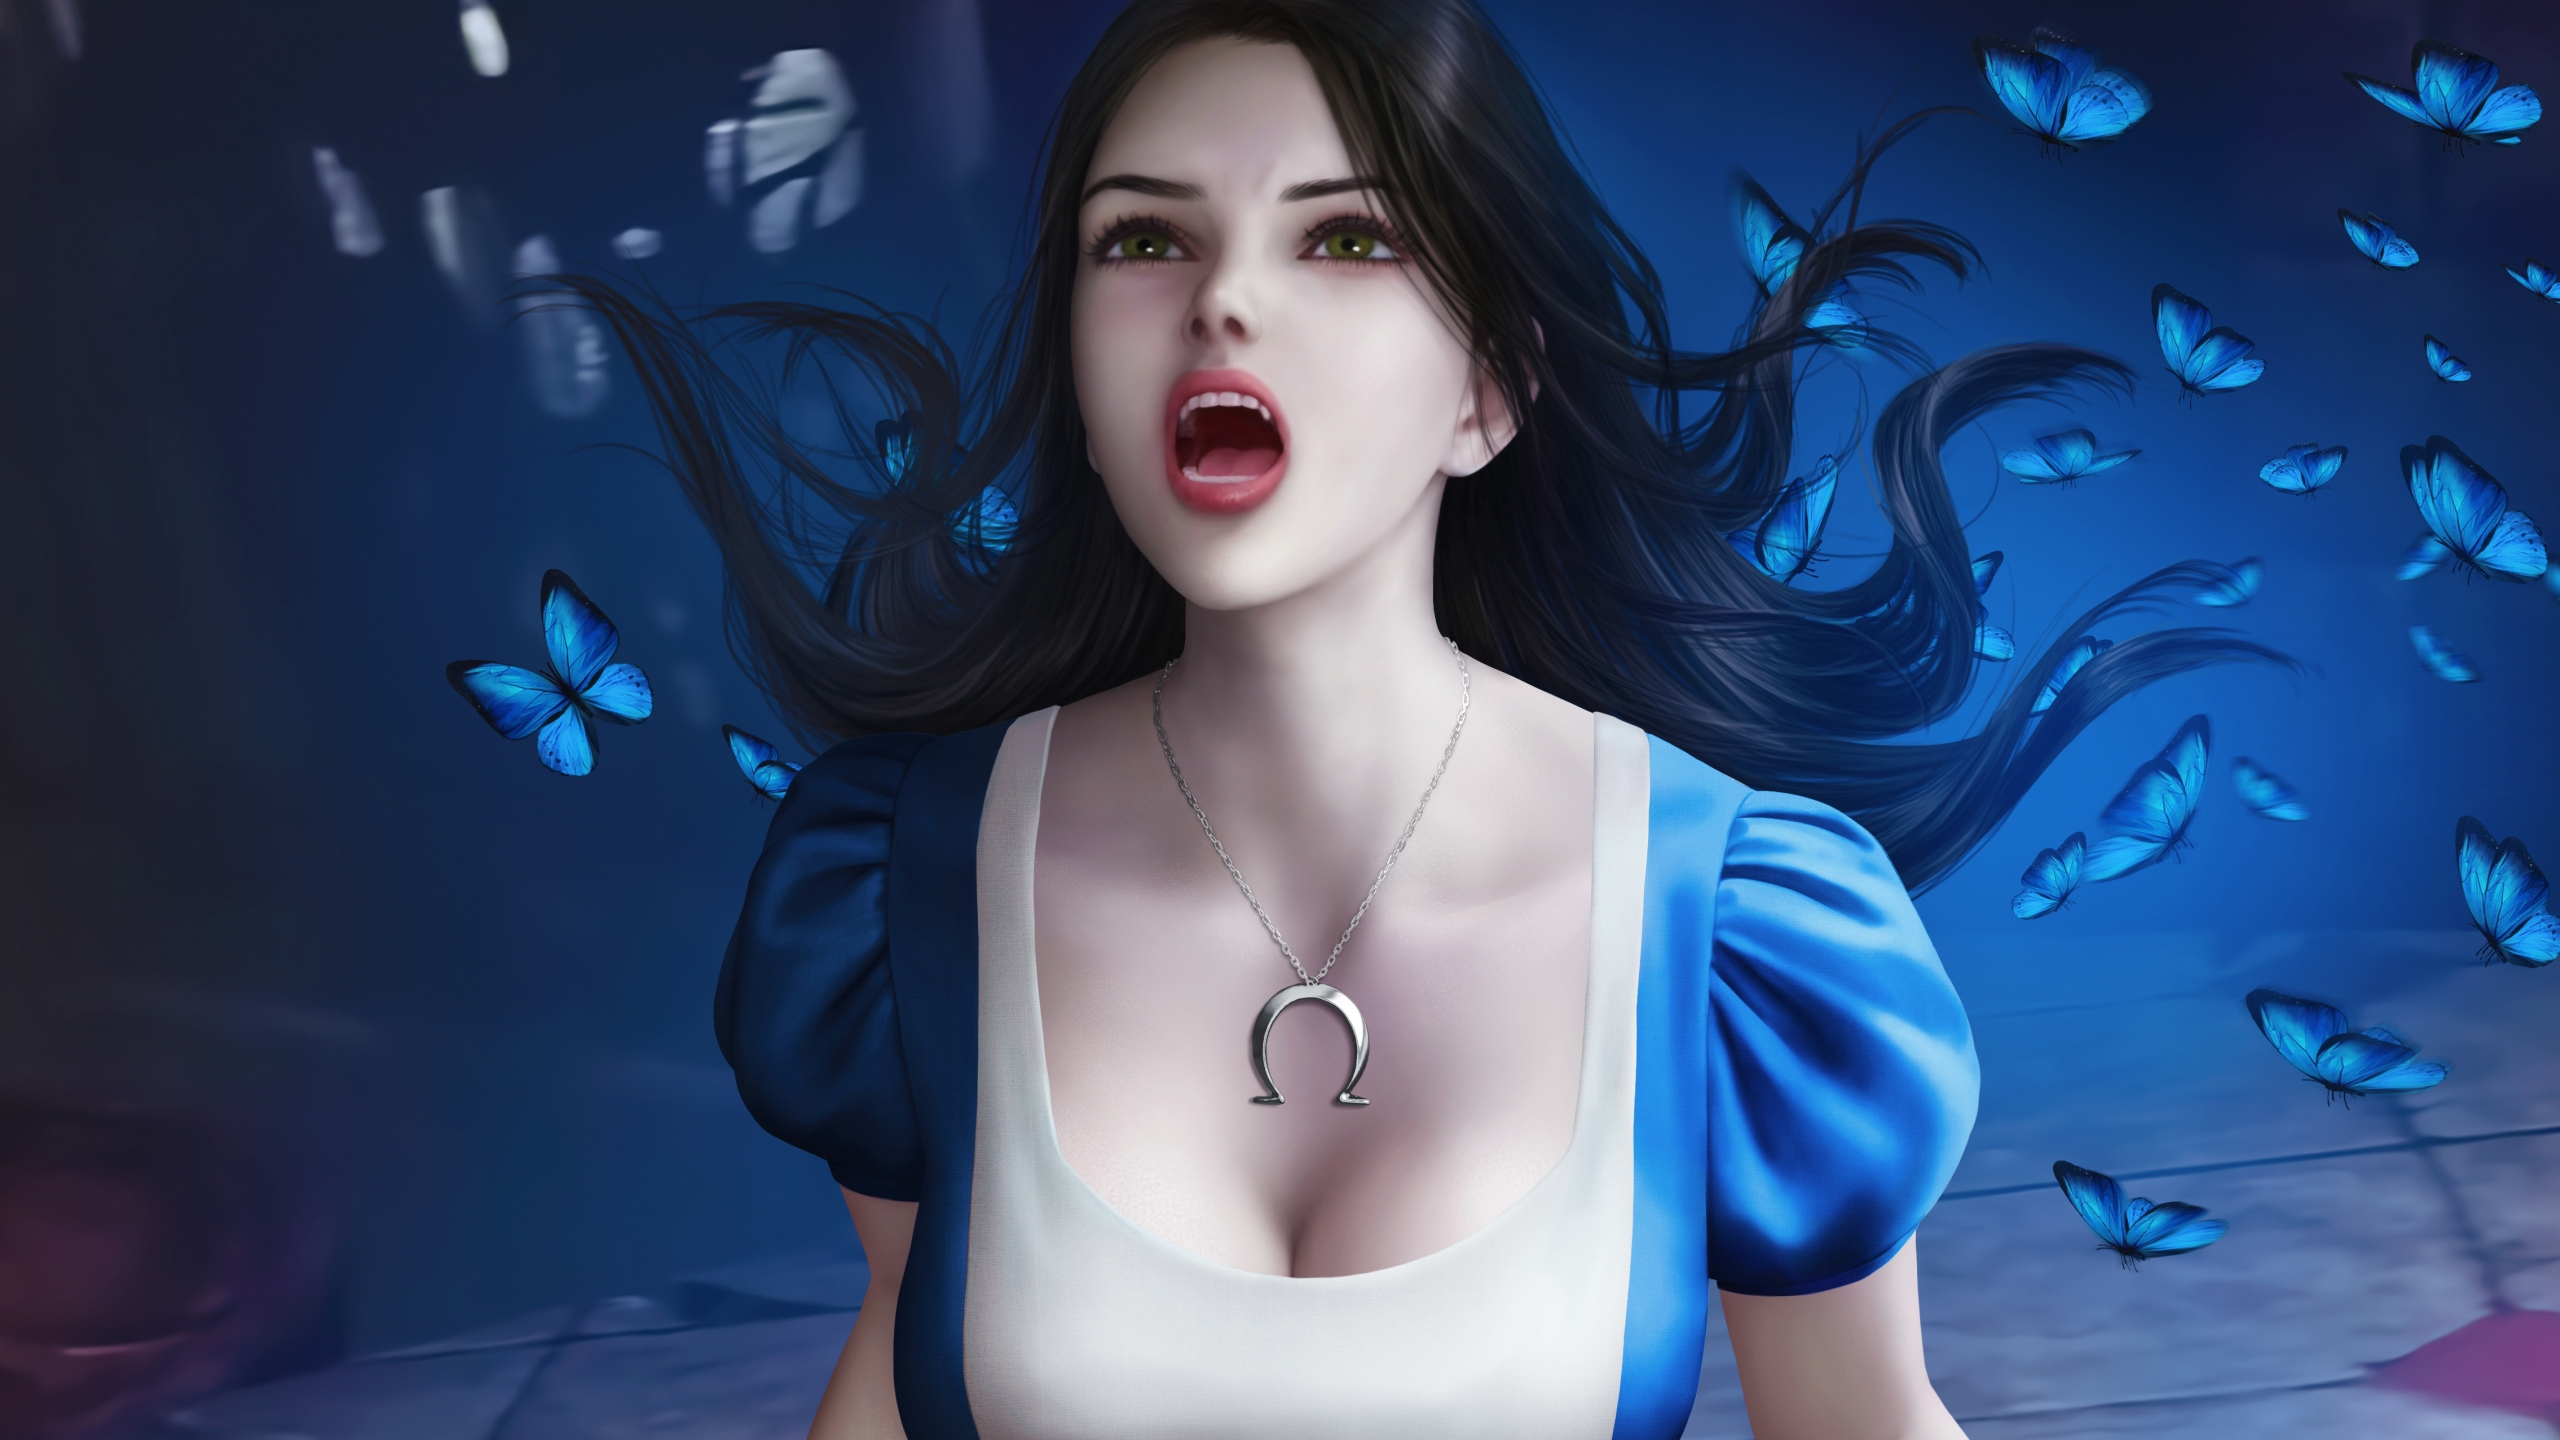 Image Alice Blood Madness Returns 2 Hair Girls vdeo game 2560x1440